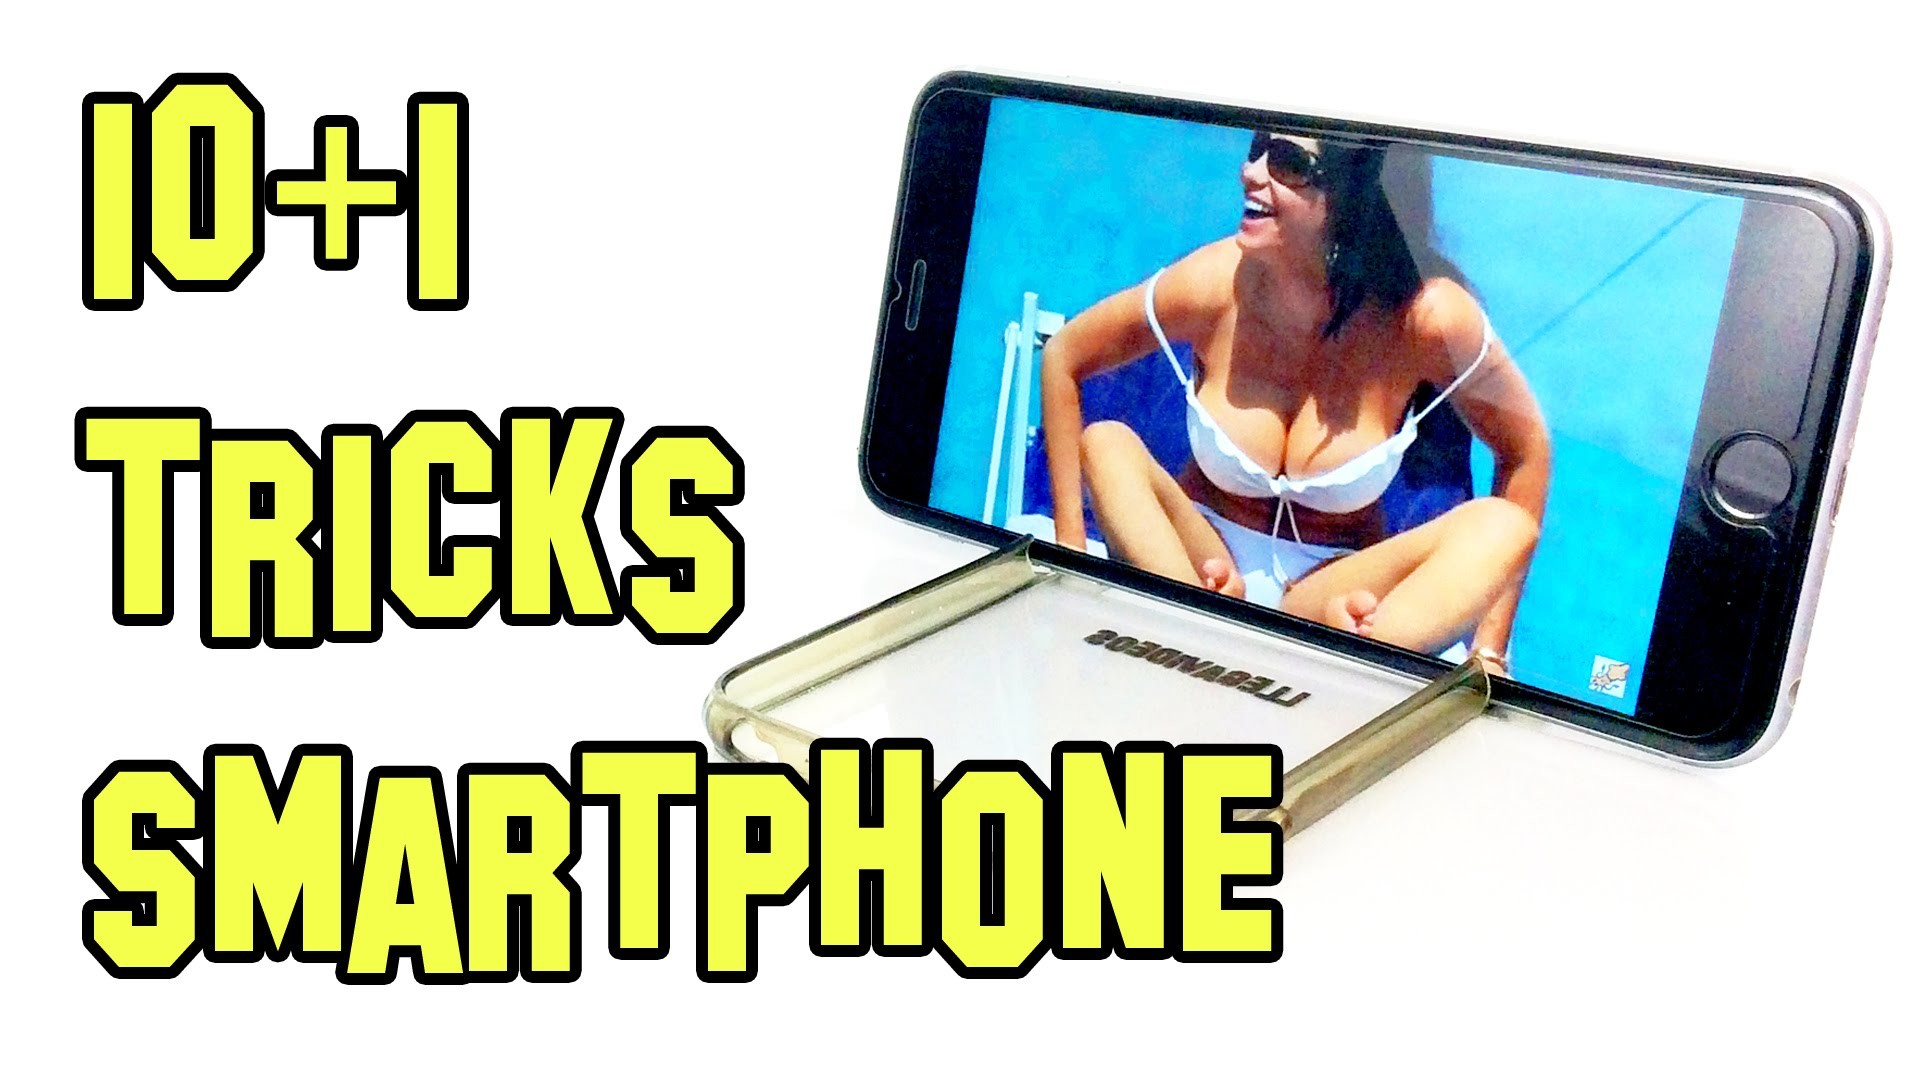 ✔ 10+1 Life Hacks For Your Smartphone